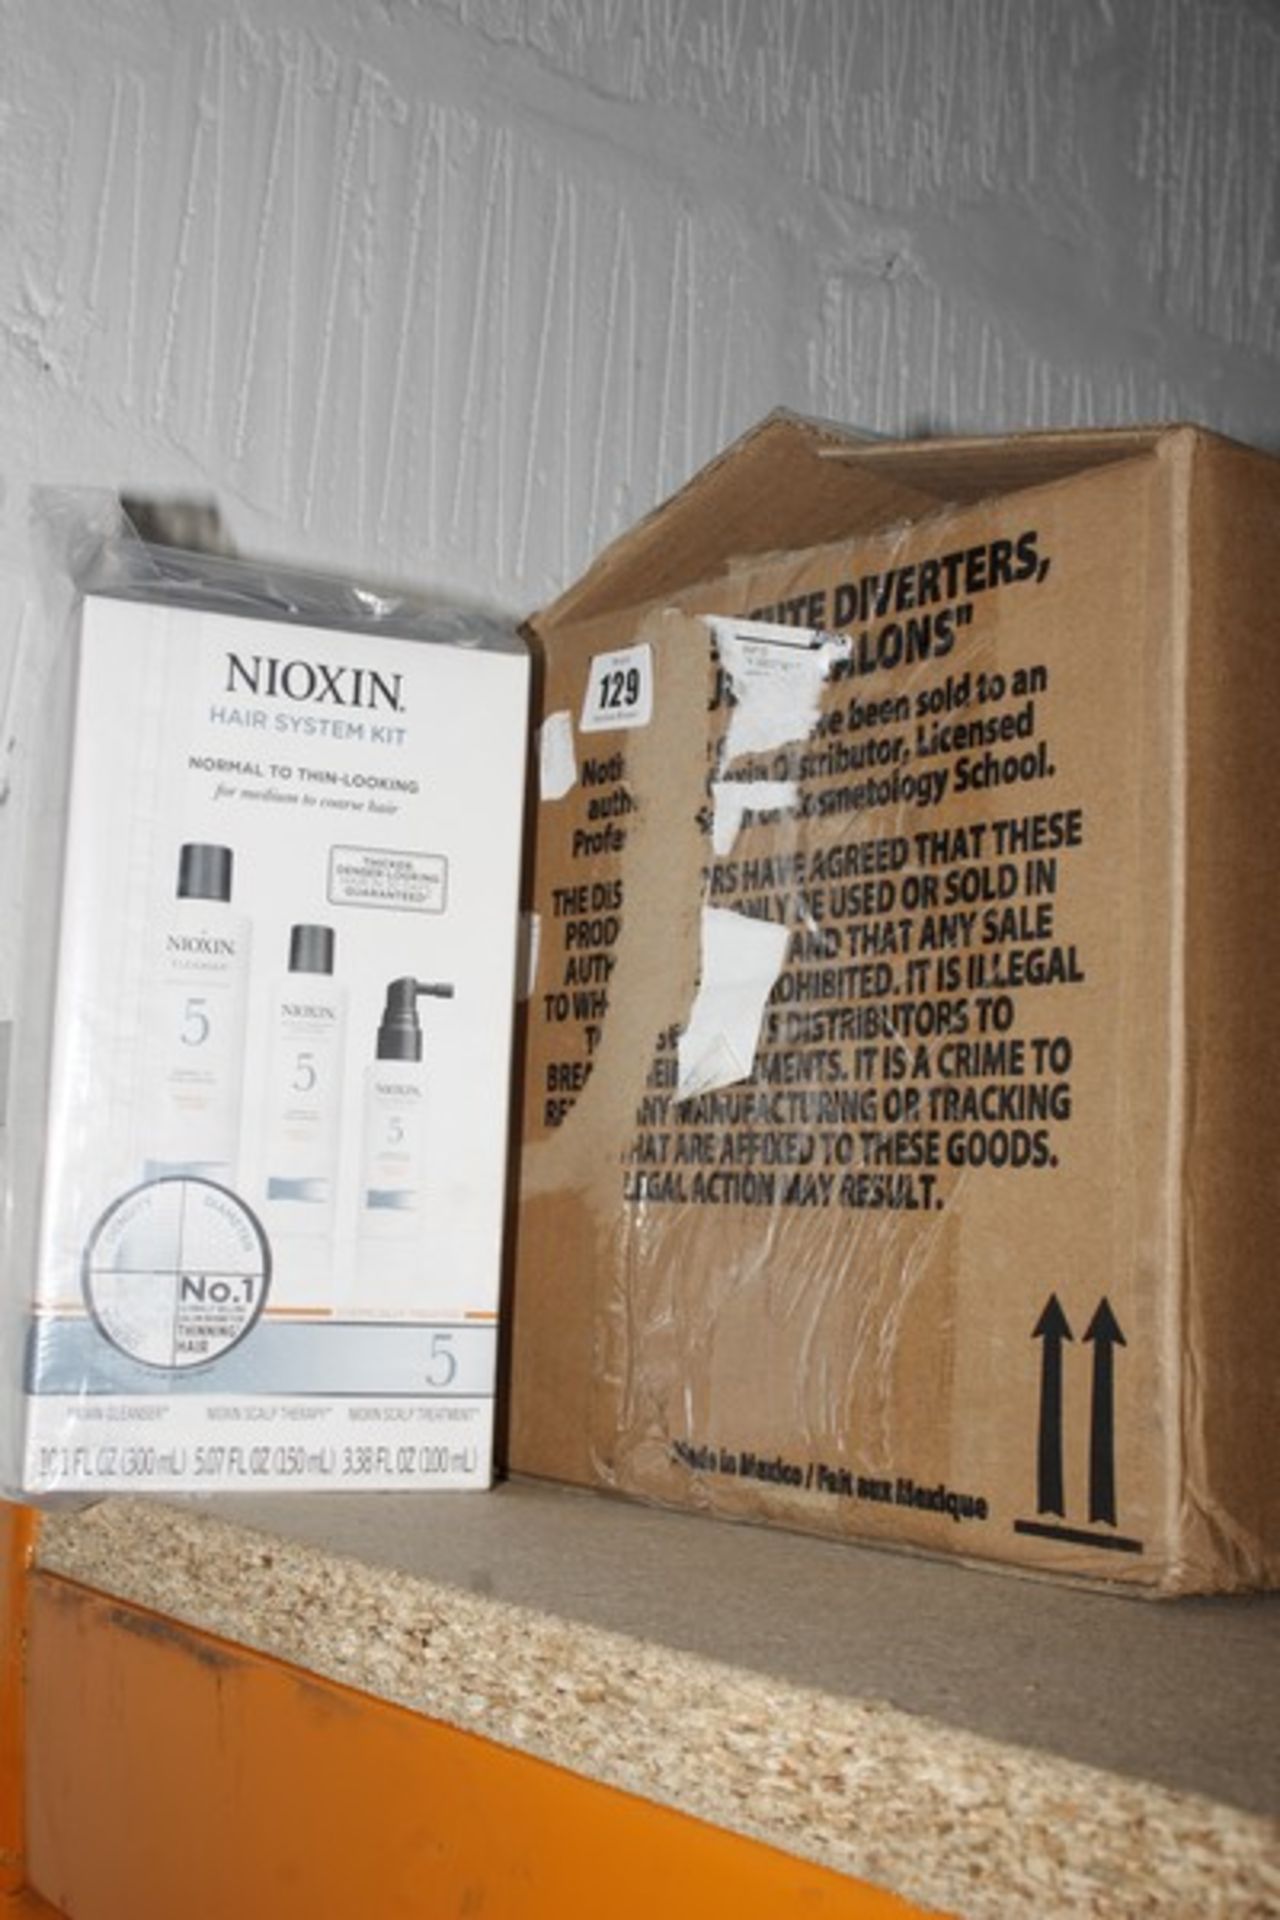 Twelve boxed Nioxin Hair System 5 kits Normal to Thin-Looking for medium to course hair (Nioxin